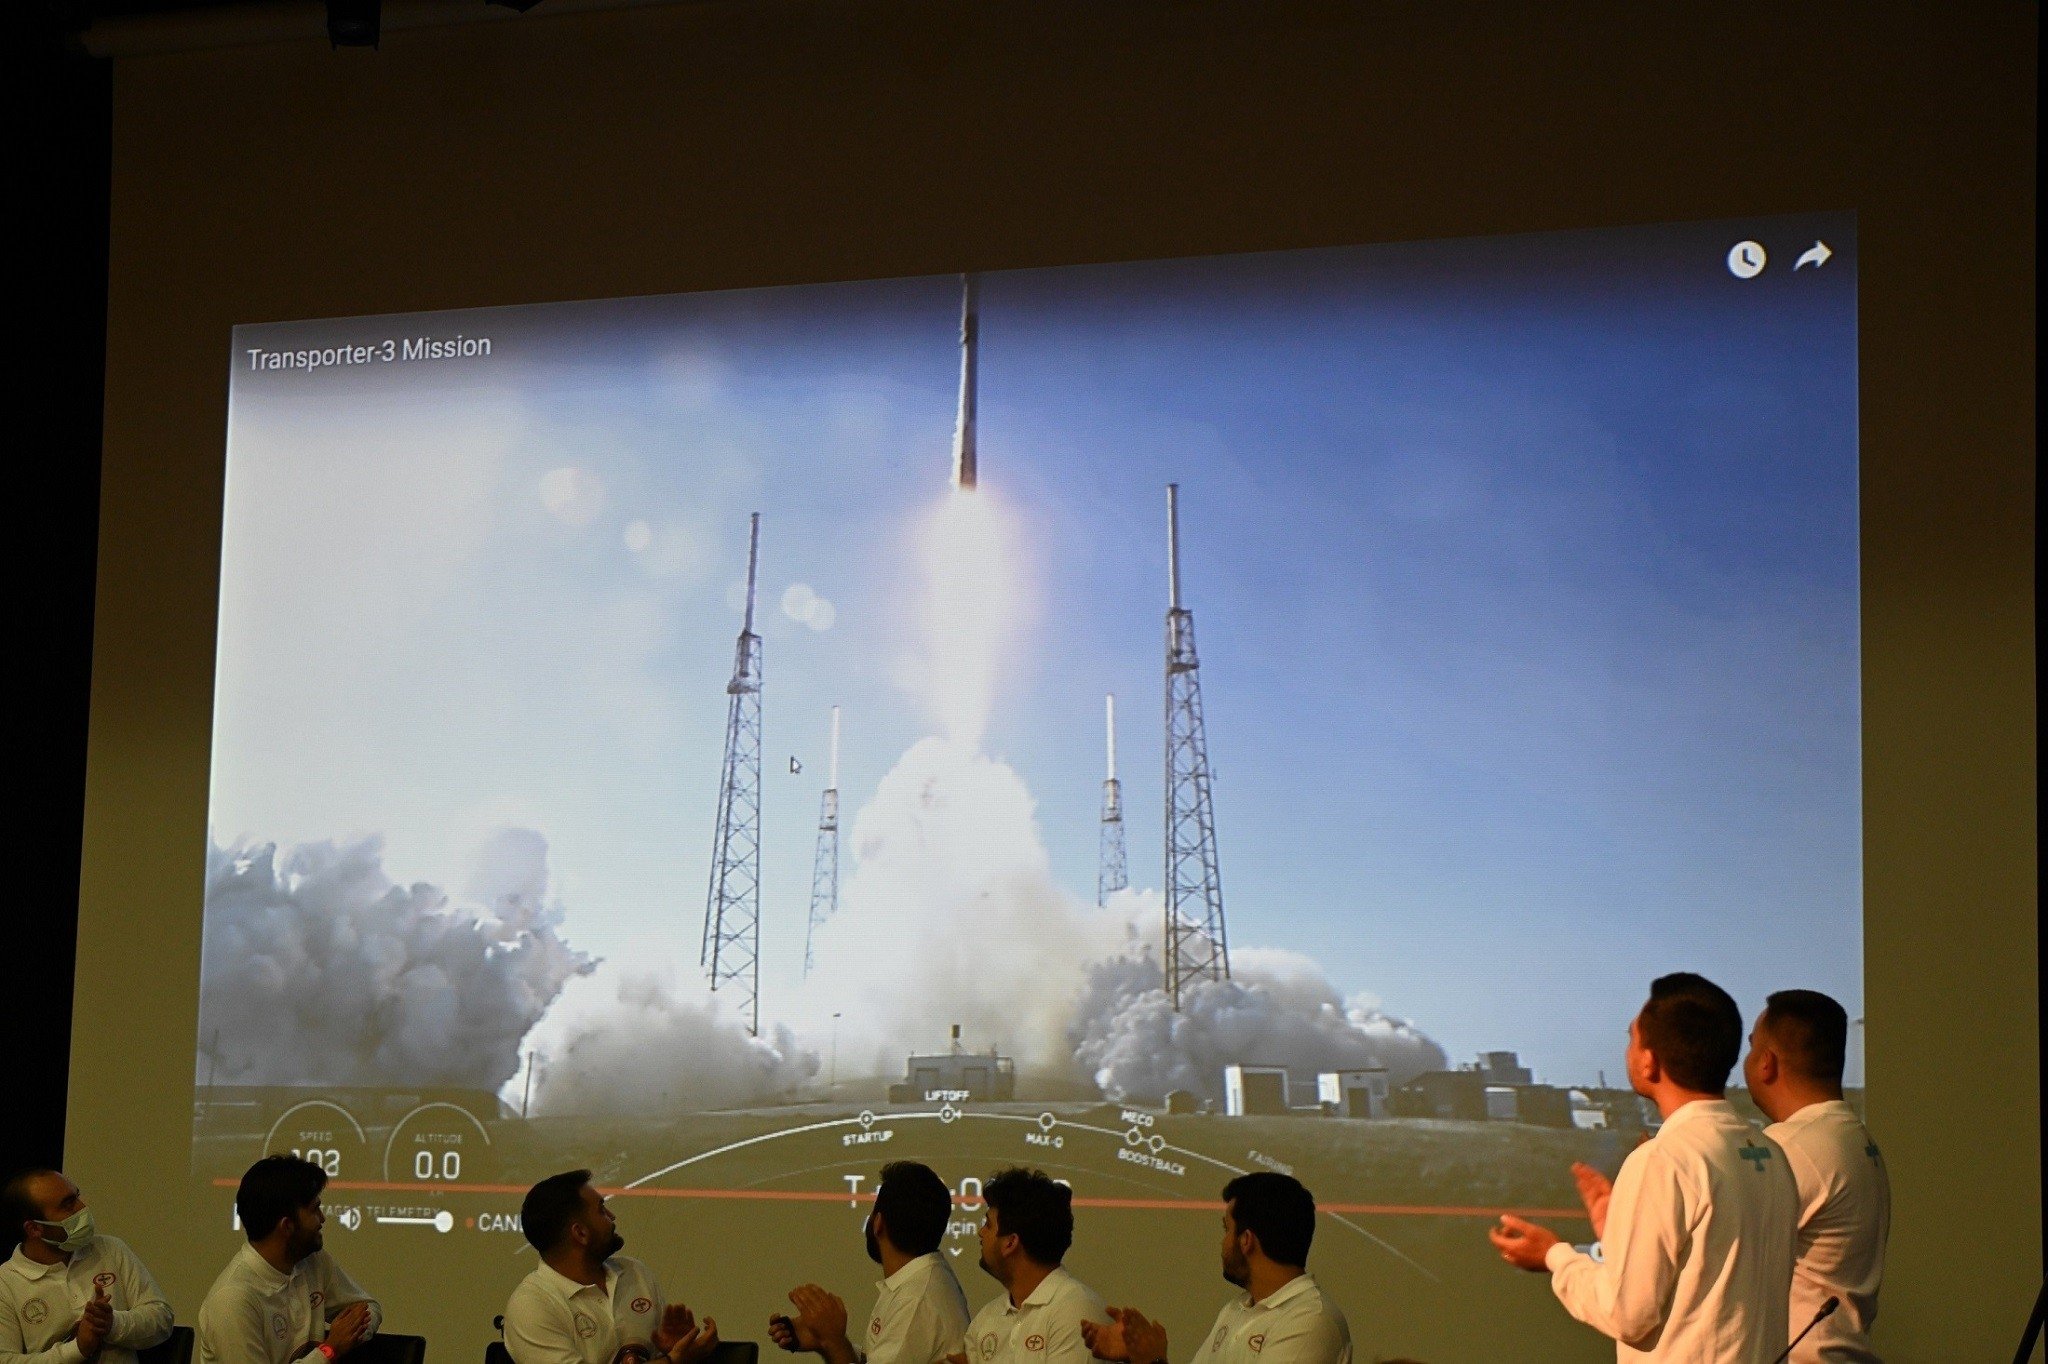 Students in the northern province of Zonguldak watch as Turkey’s first mini satellite Grizu-263A is launched on SpaceX’s Falcon 9 rocket from Cape Canaveral, Florida, U.S., Jan. 13, 2022. (IHA Photo)